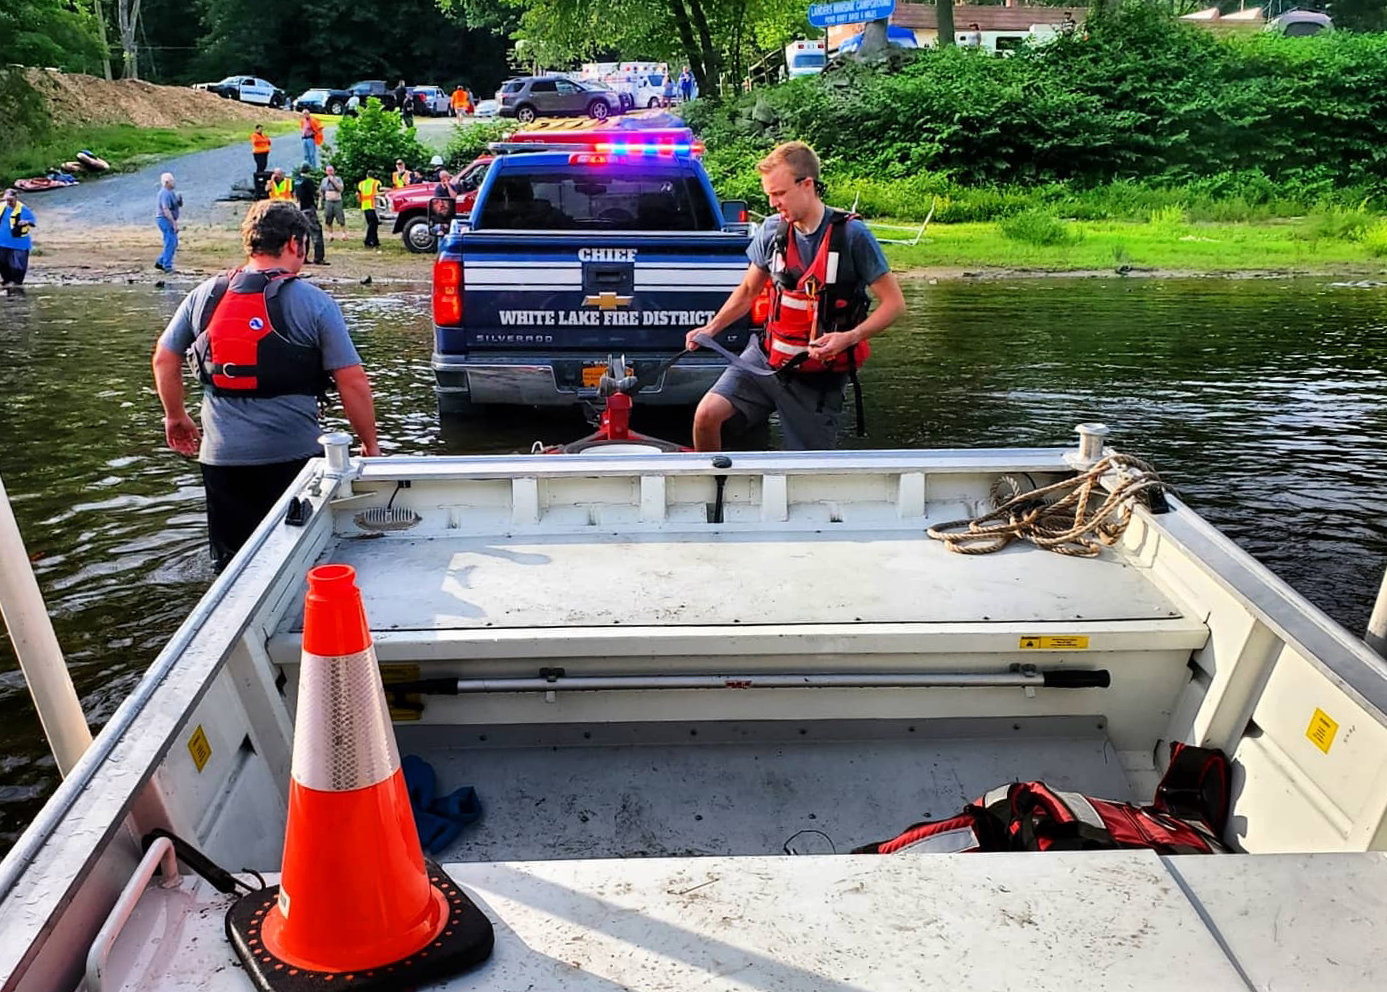 White Lake Fire Company assisted multiple agencies in a water rescue in the Delaware River on Saturday. They launched their boat from Landers in Barryville and the victim was found the next day.